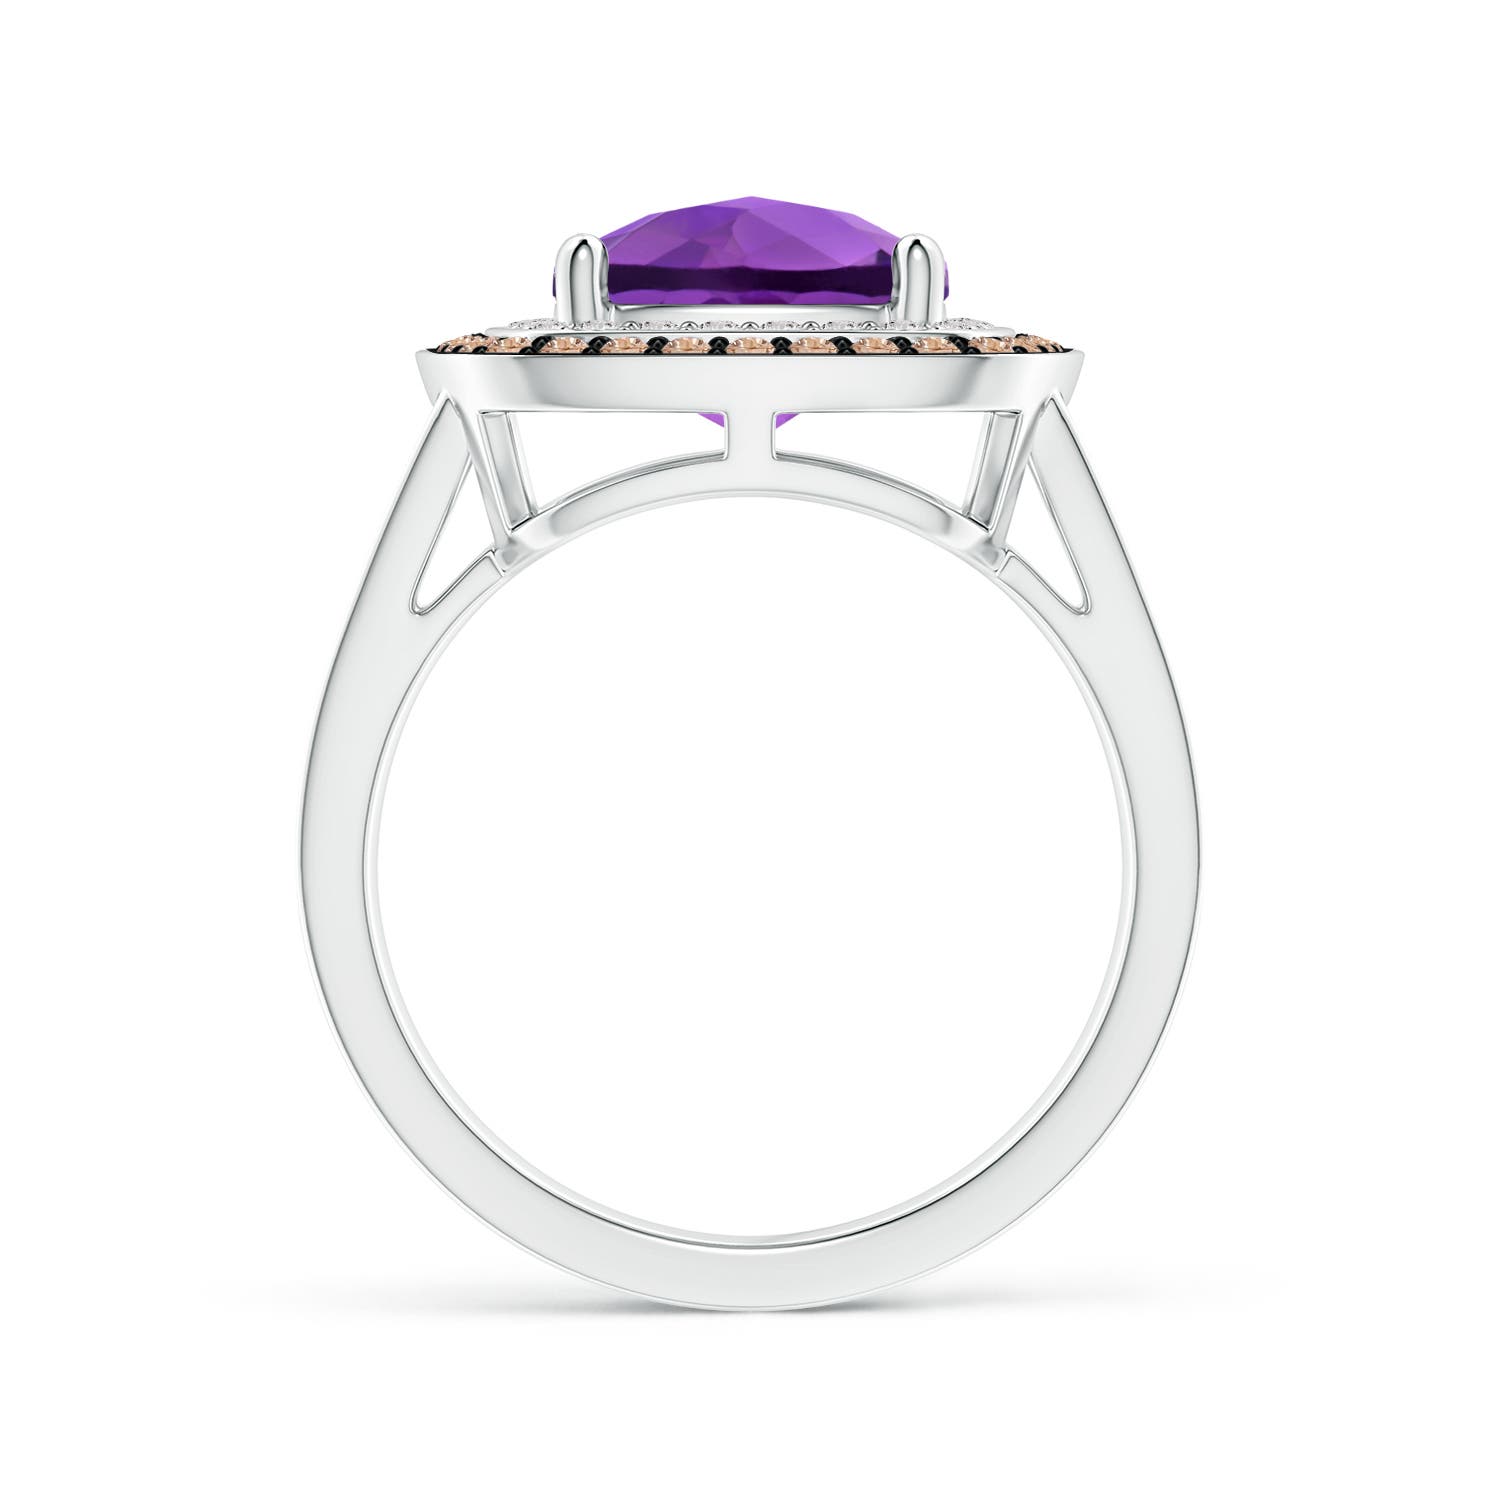 AA - Amethyst / 3.7 CT / 14 KT White Gold